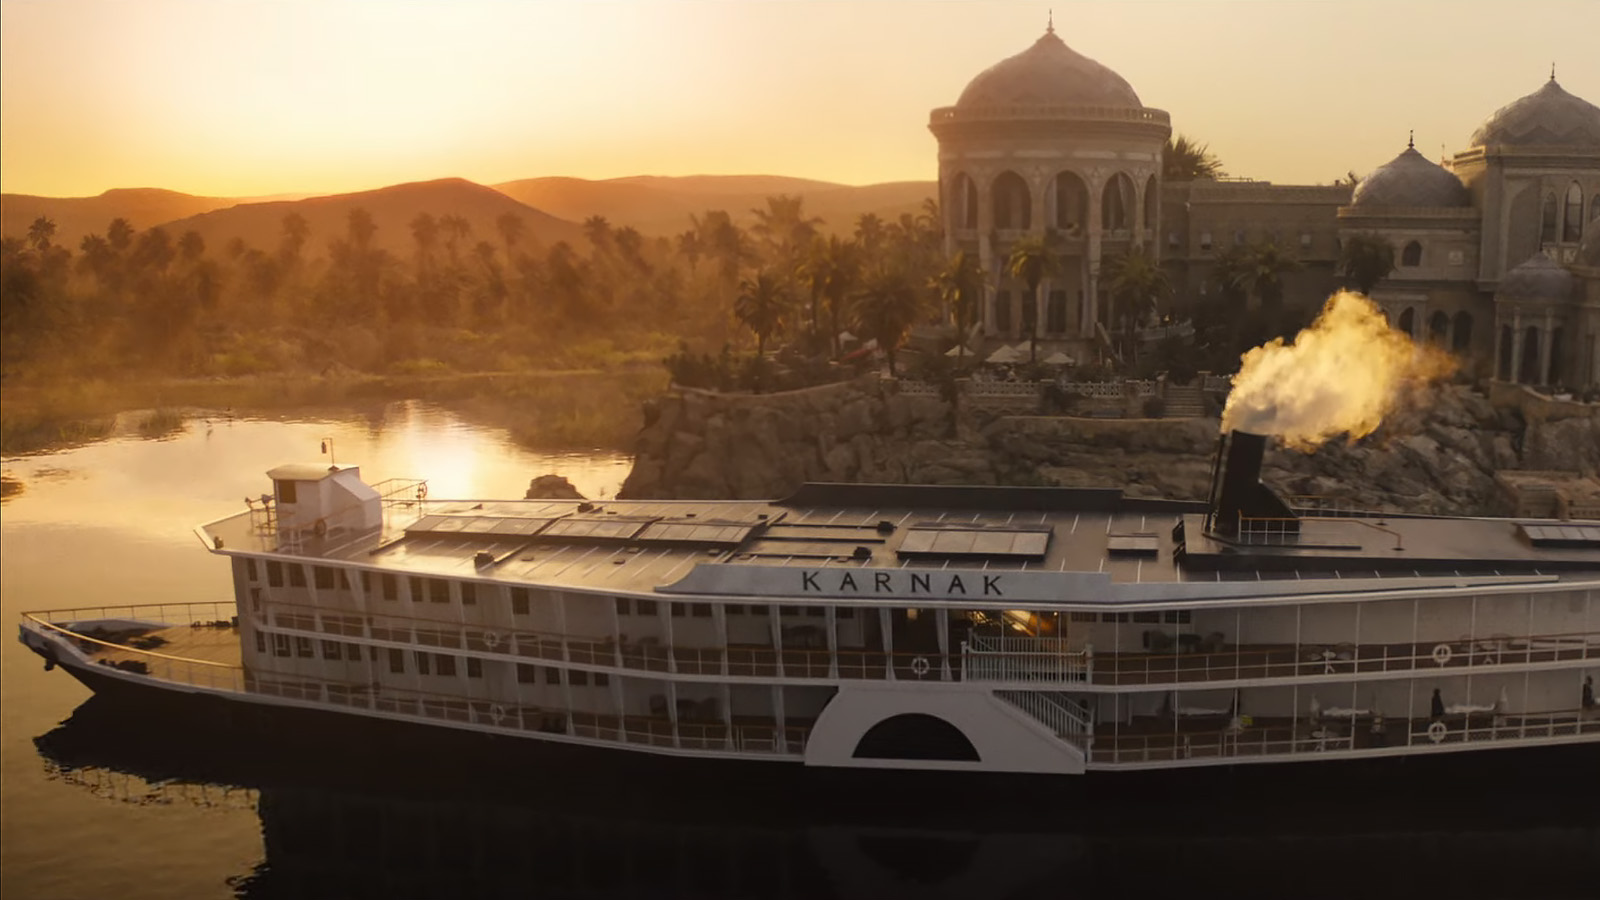 Karnak docks as the hotel in Death on the Nile. Image © 20th Century Studios